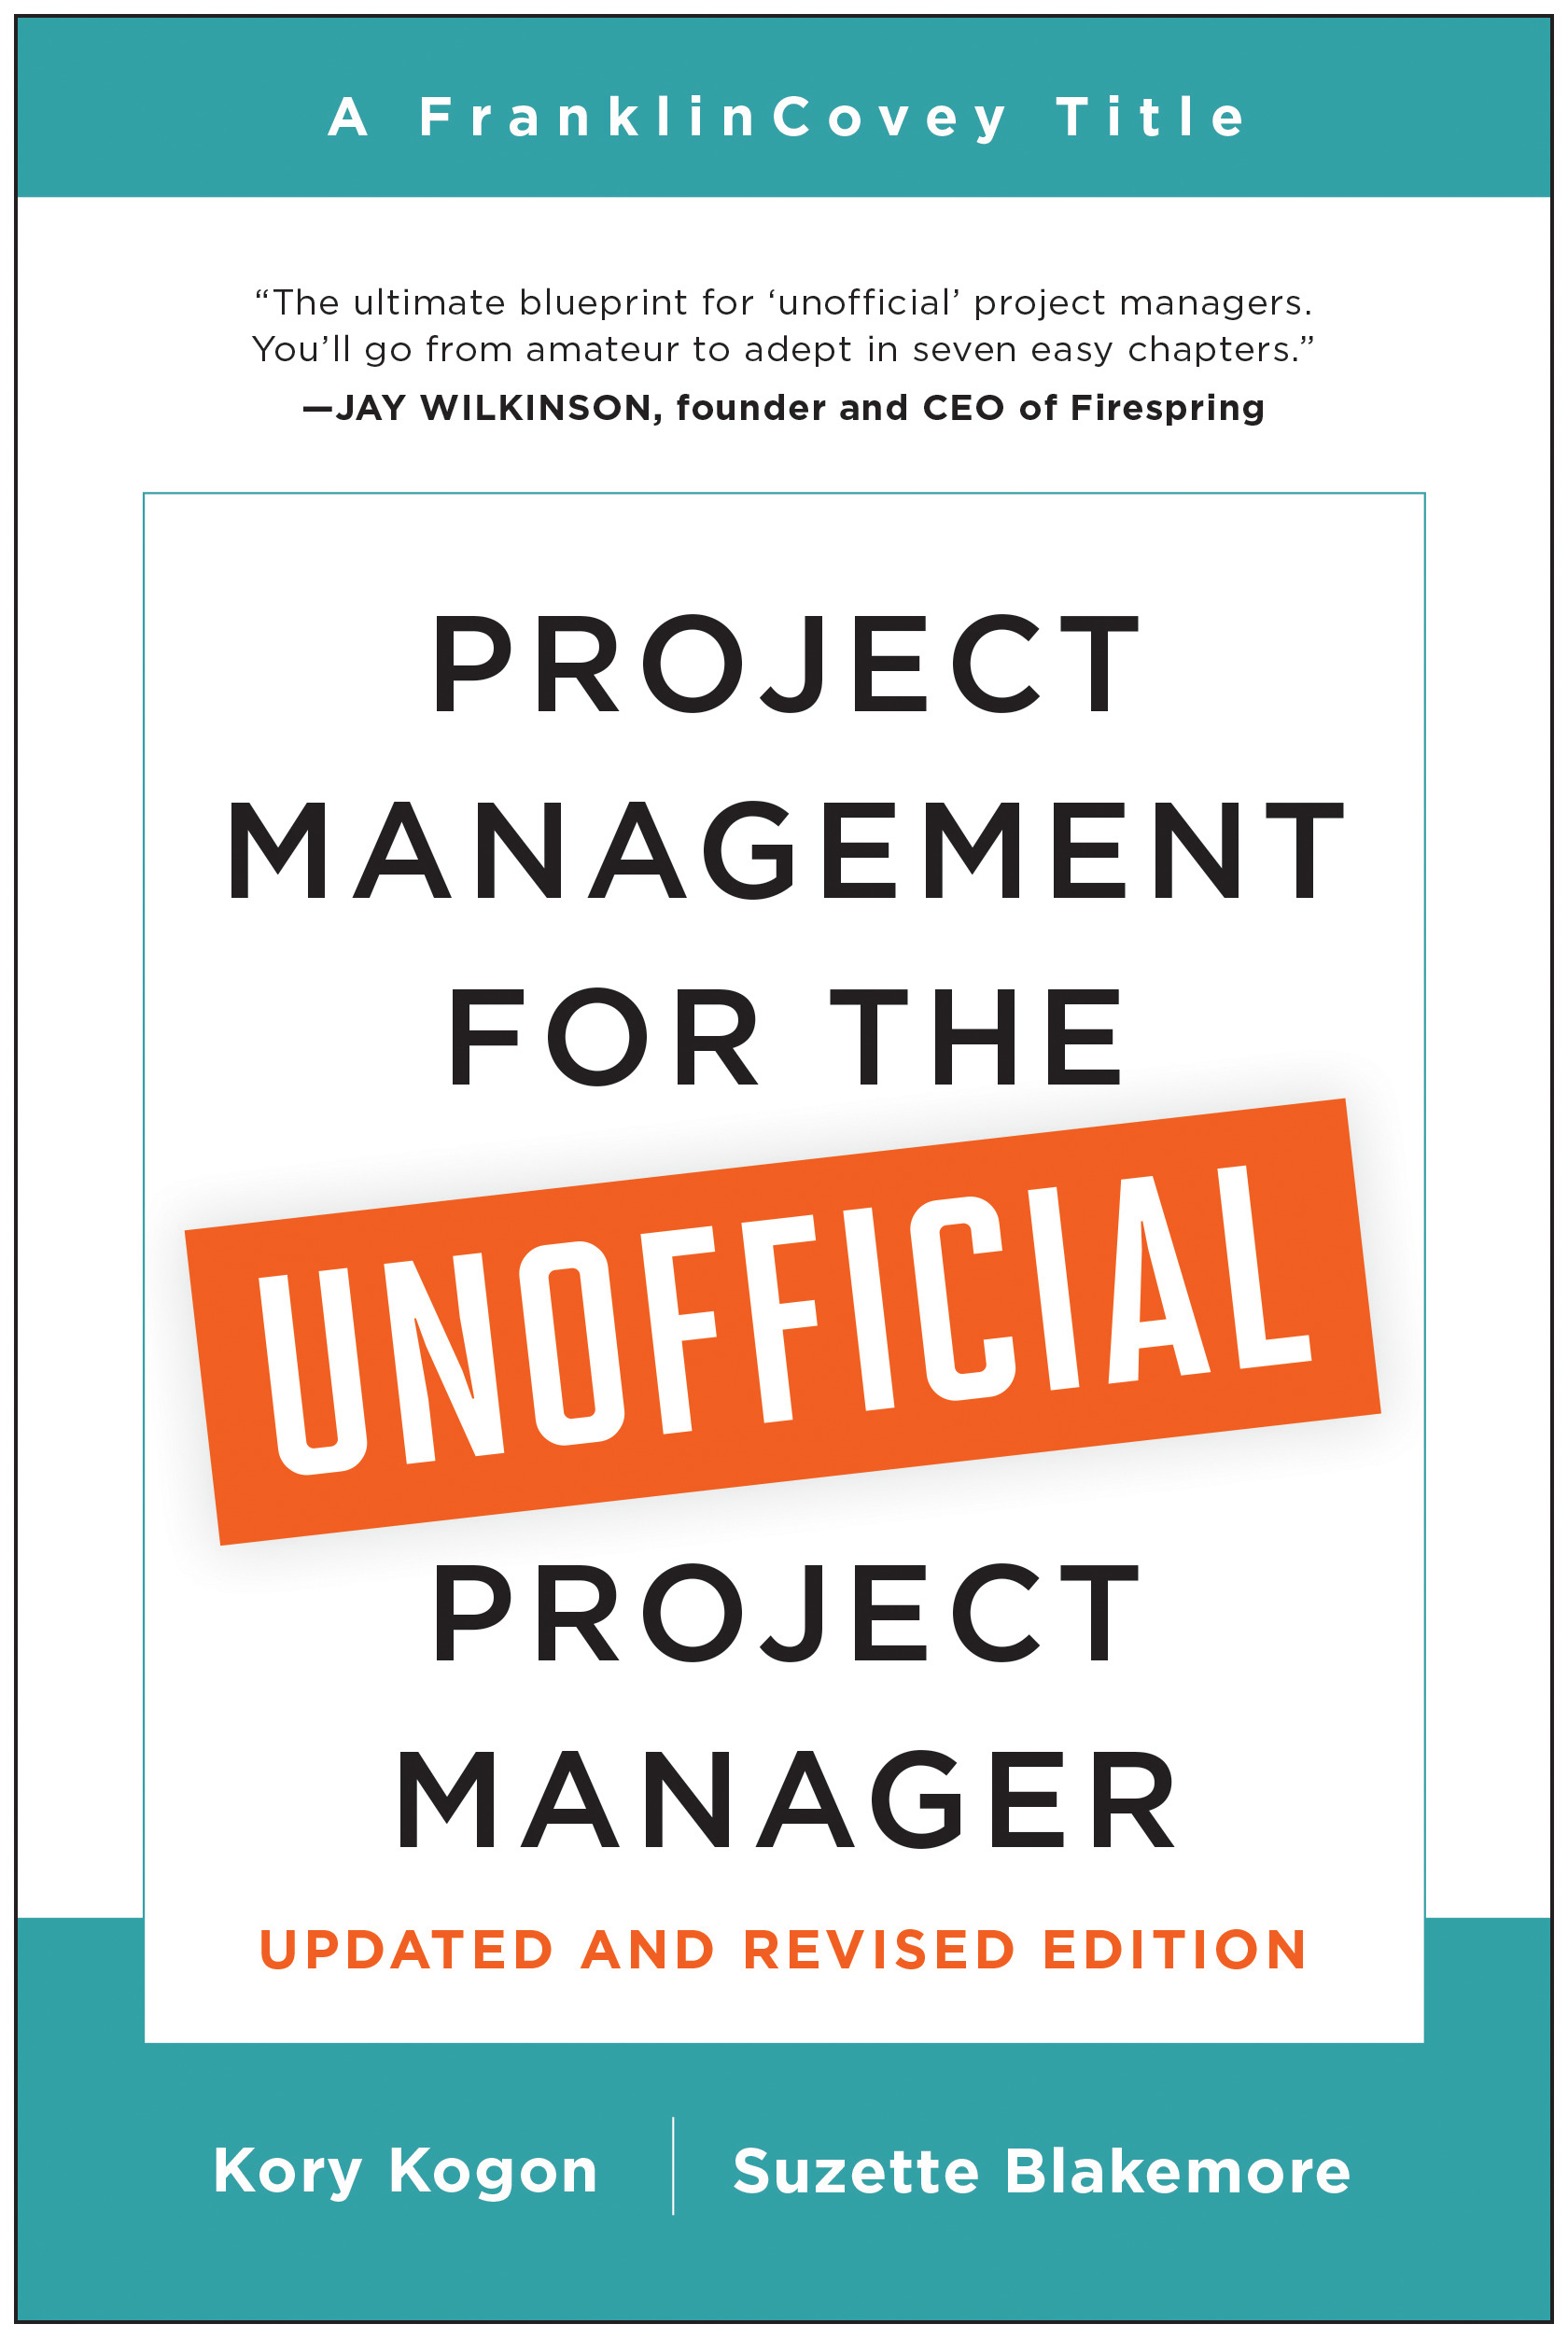 Project Management for the Unofficial Project Manager (Updated and Revised Edition) | Kogon, Kory (Auteur) | Blakemore, Suzette (Auteur)